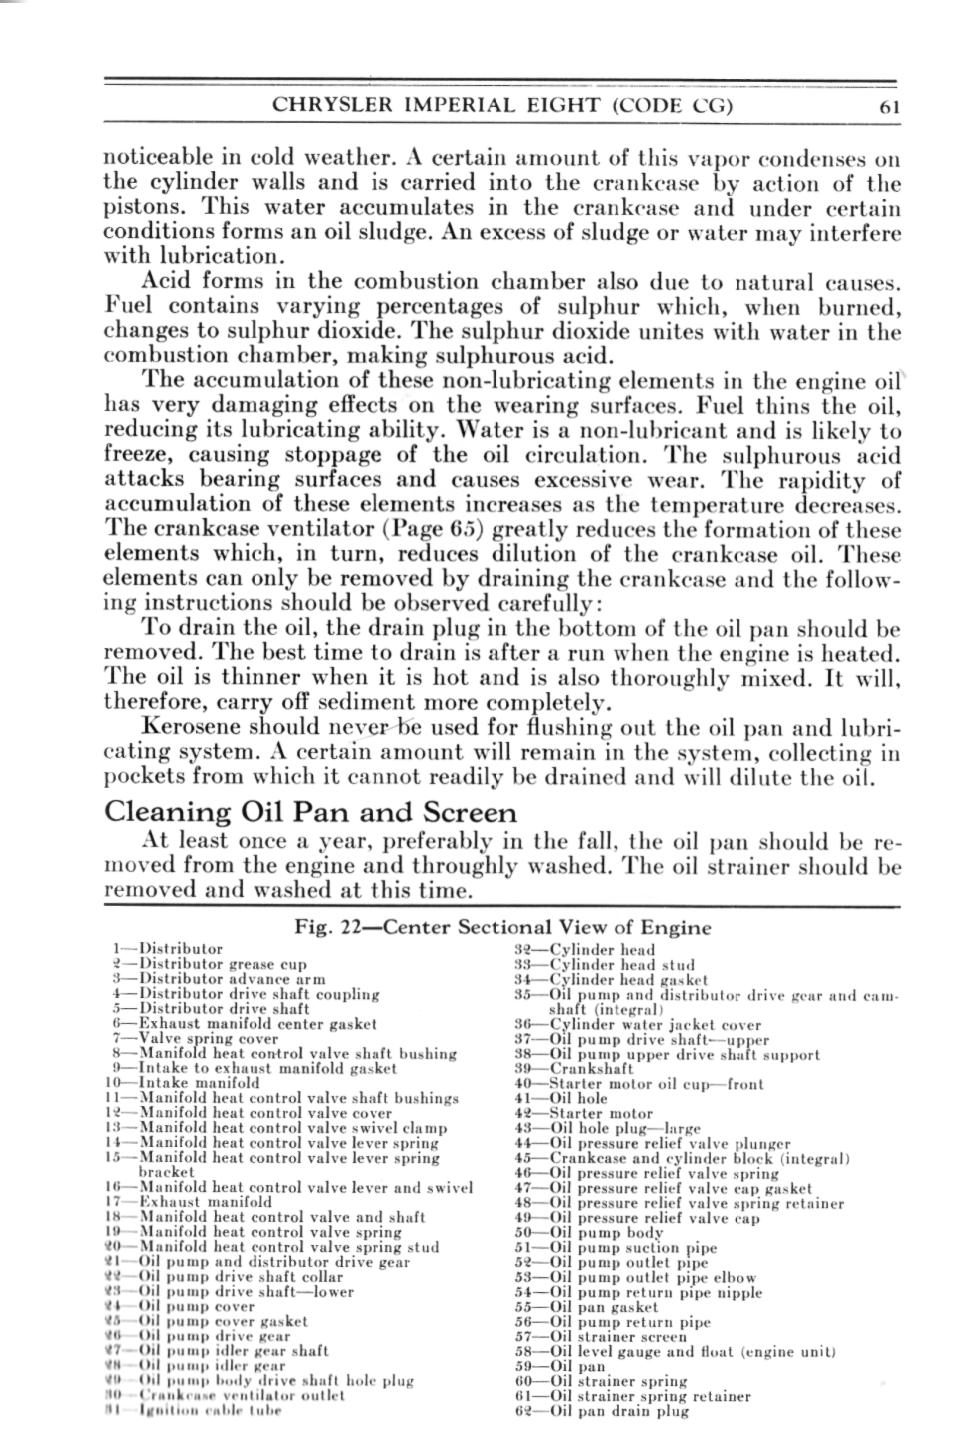 1931 Chrysler Imperial Owners Manual Page 58